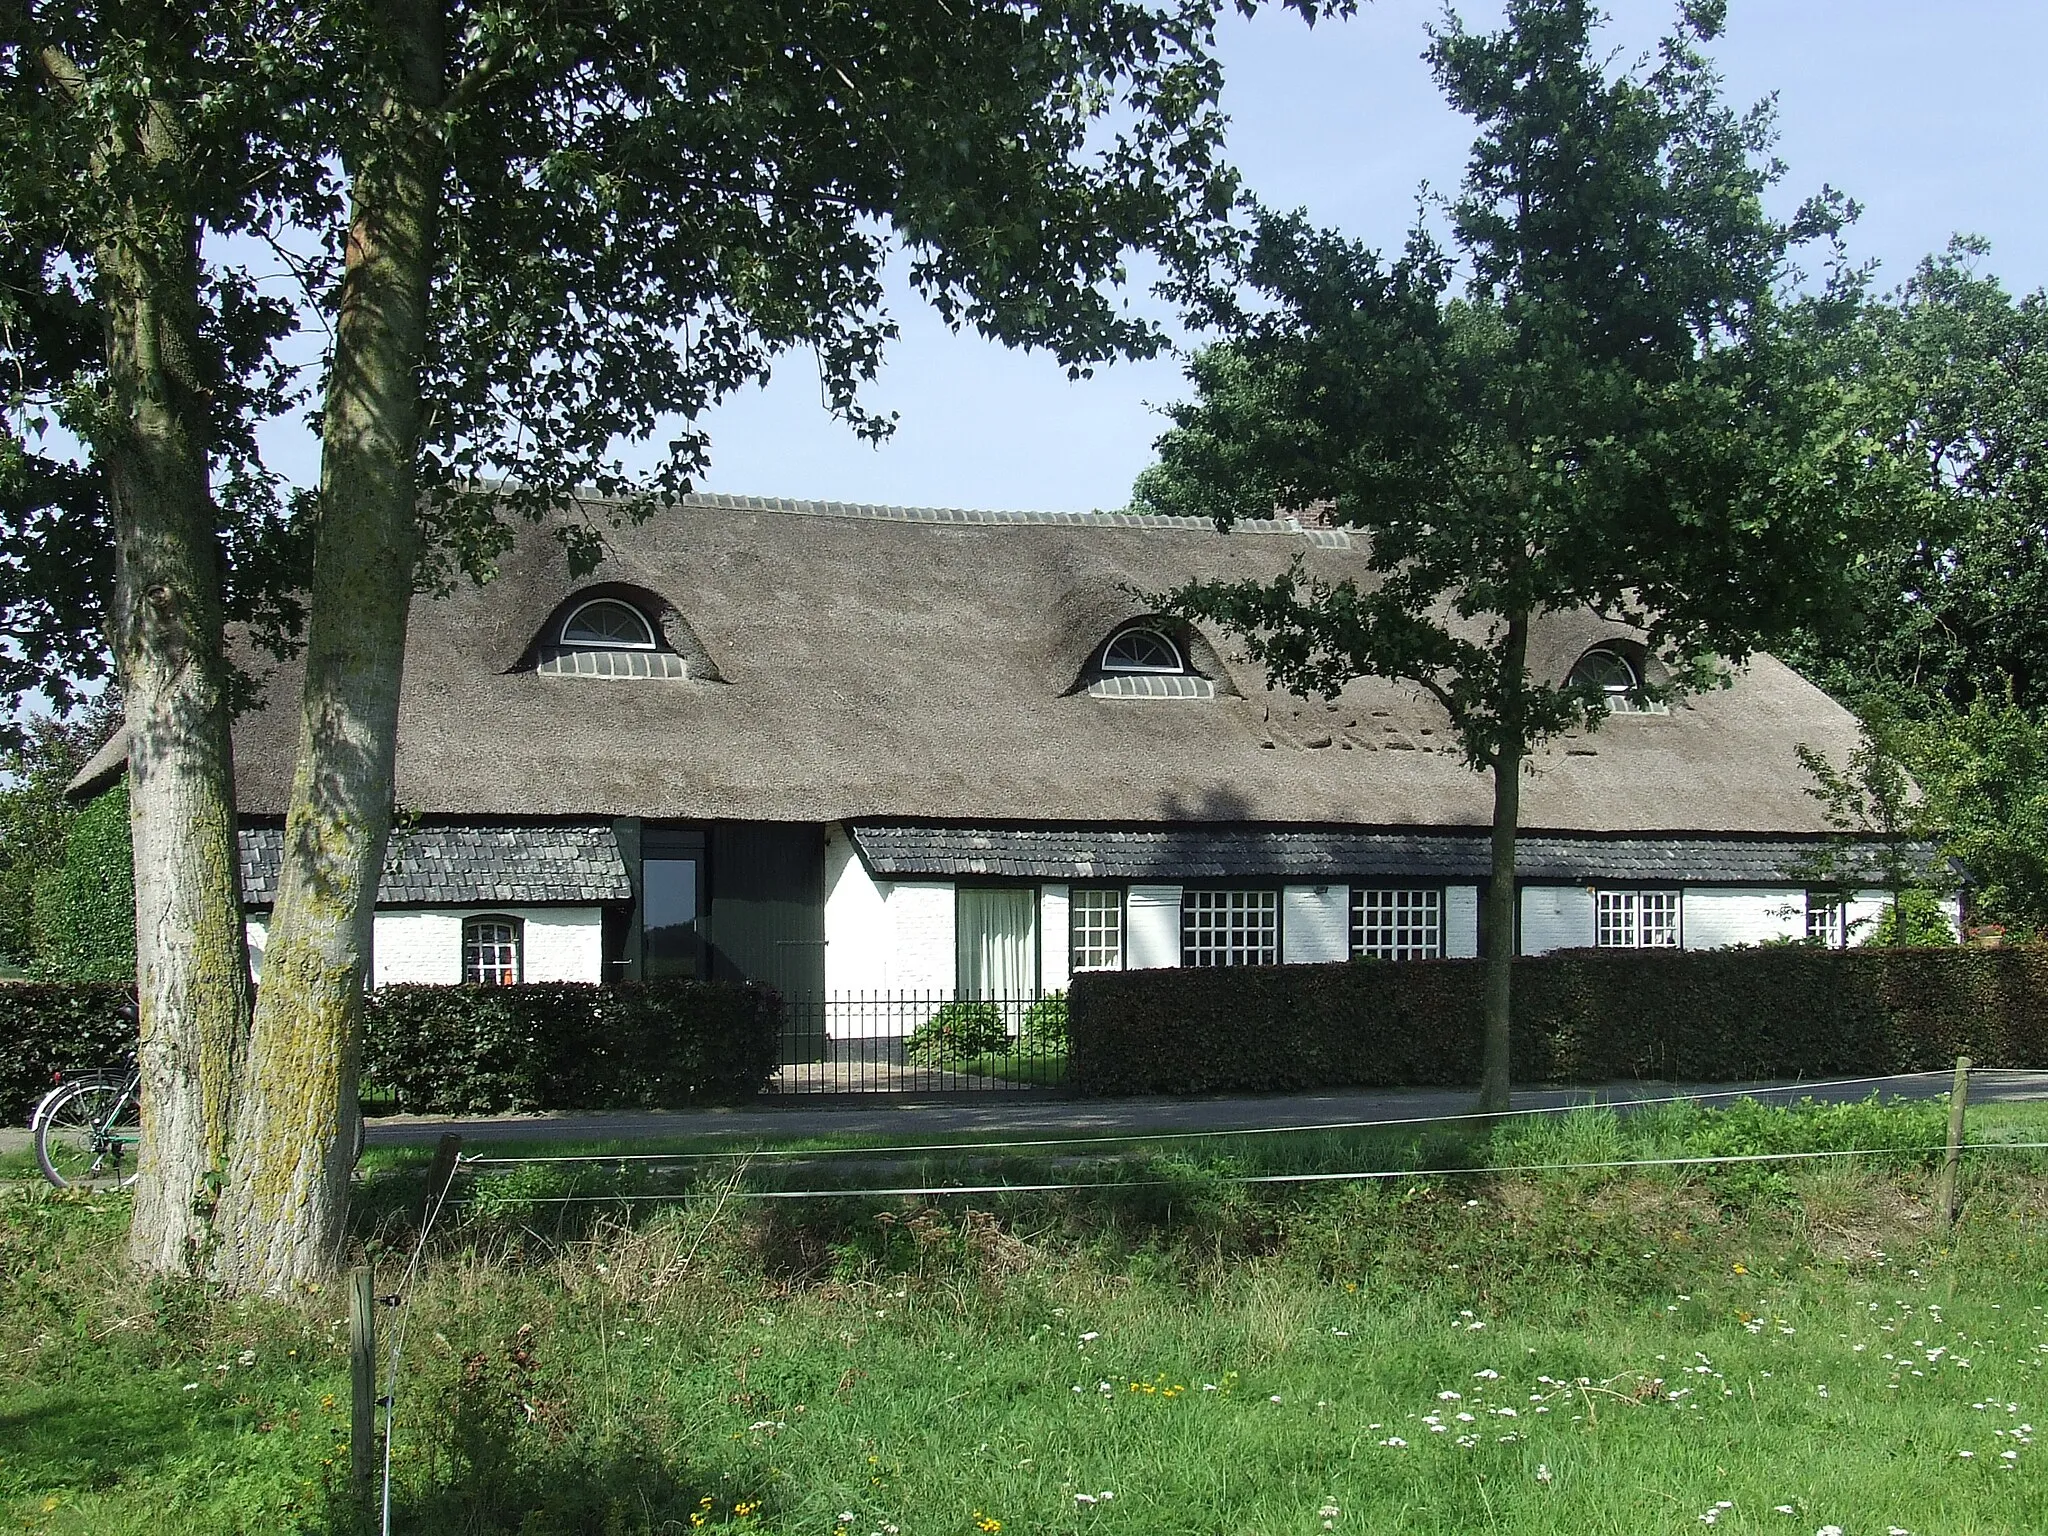 Photo showing: This is an image of rijksmonument number 9425